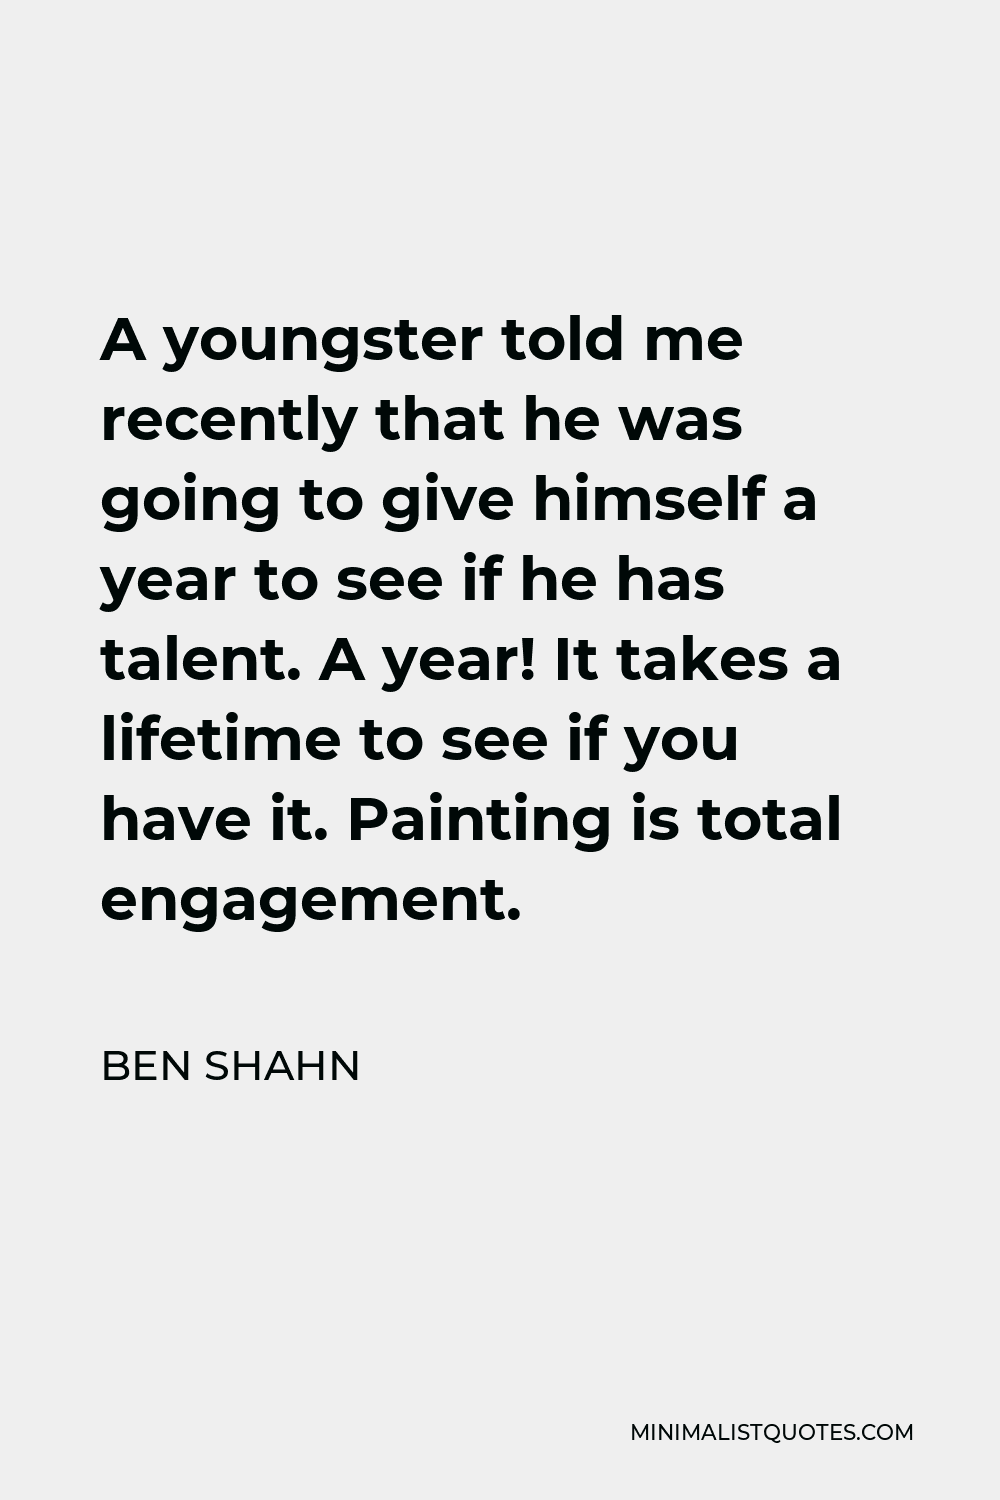 Ben Shahn Quote - A youngster told me recently that he was going to give himself a year to see if he has talent. A year! It takes a lifetime to see if you have it. Painting is total engagement.